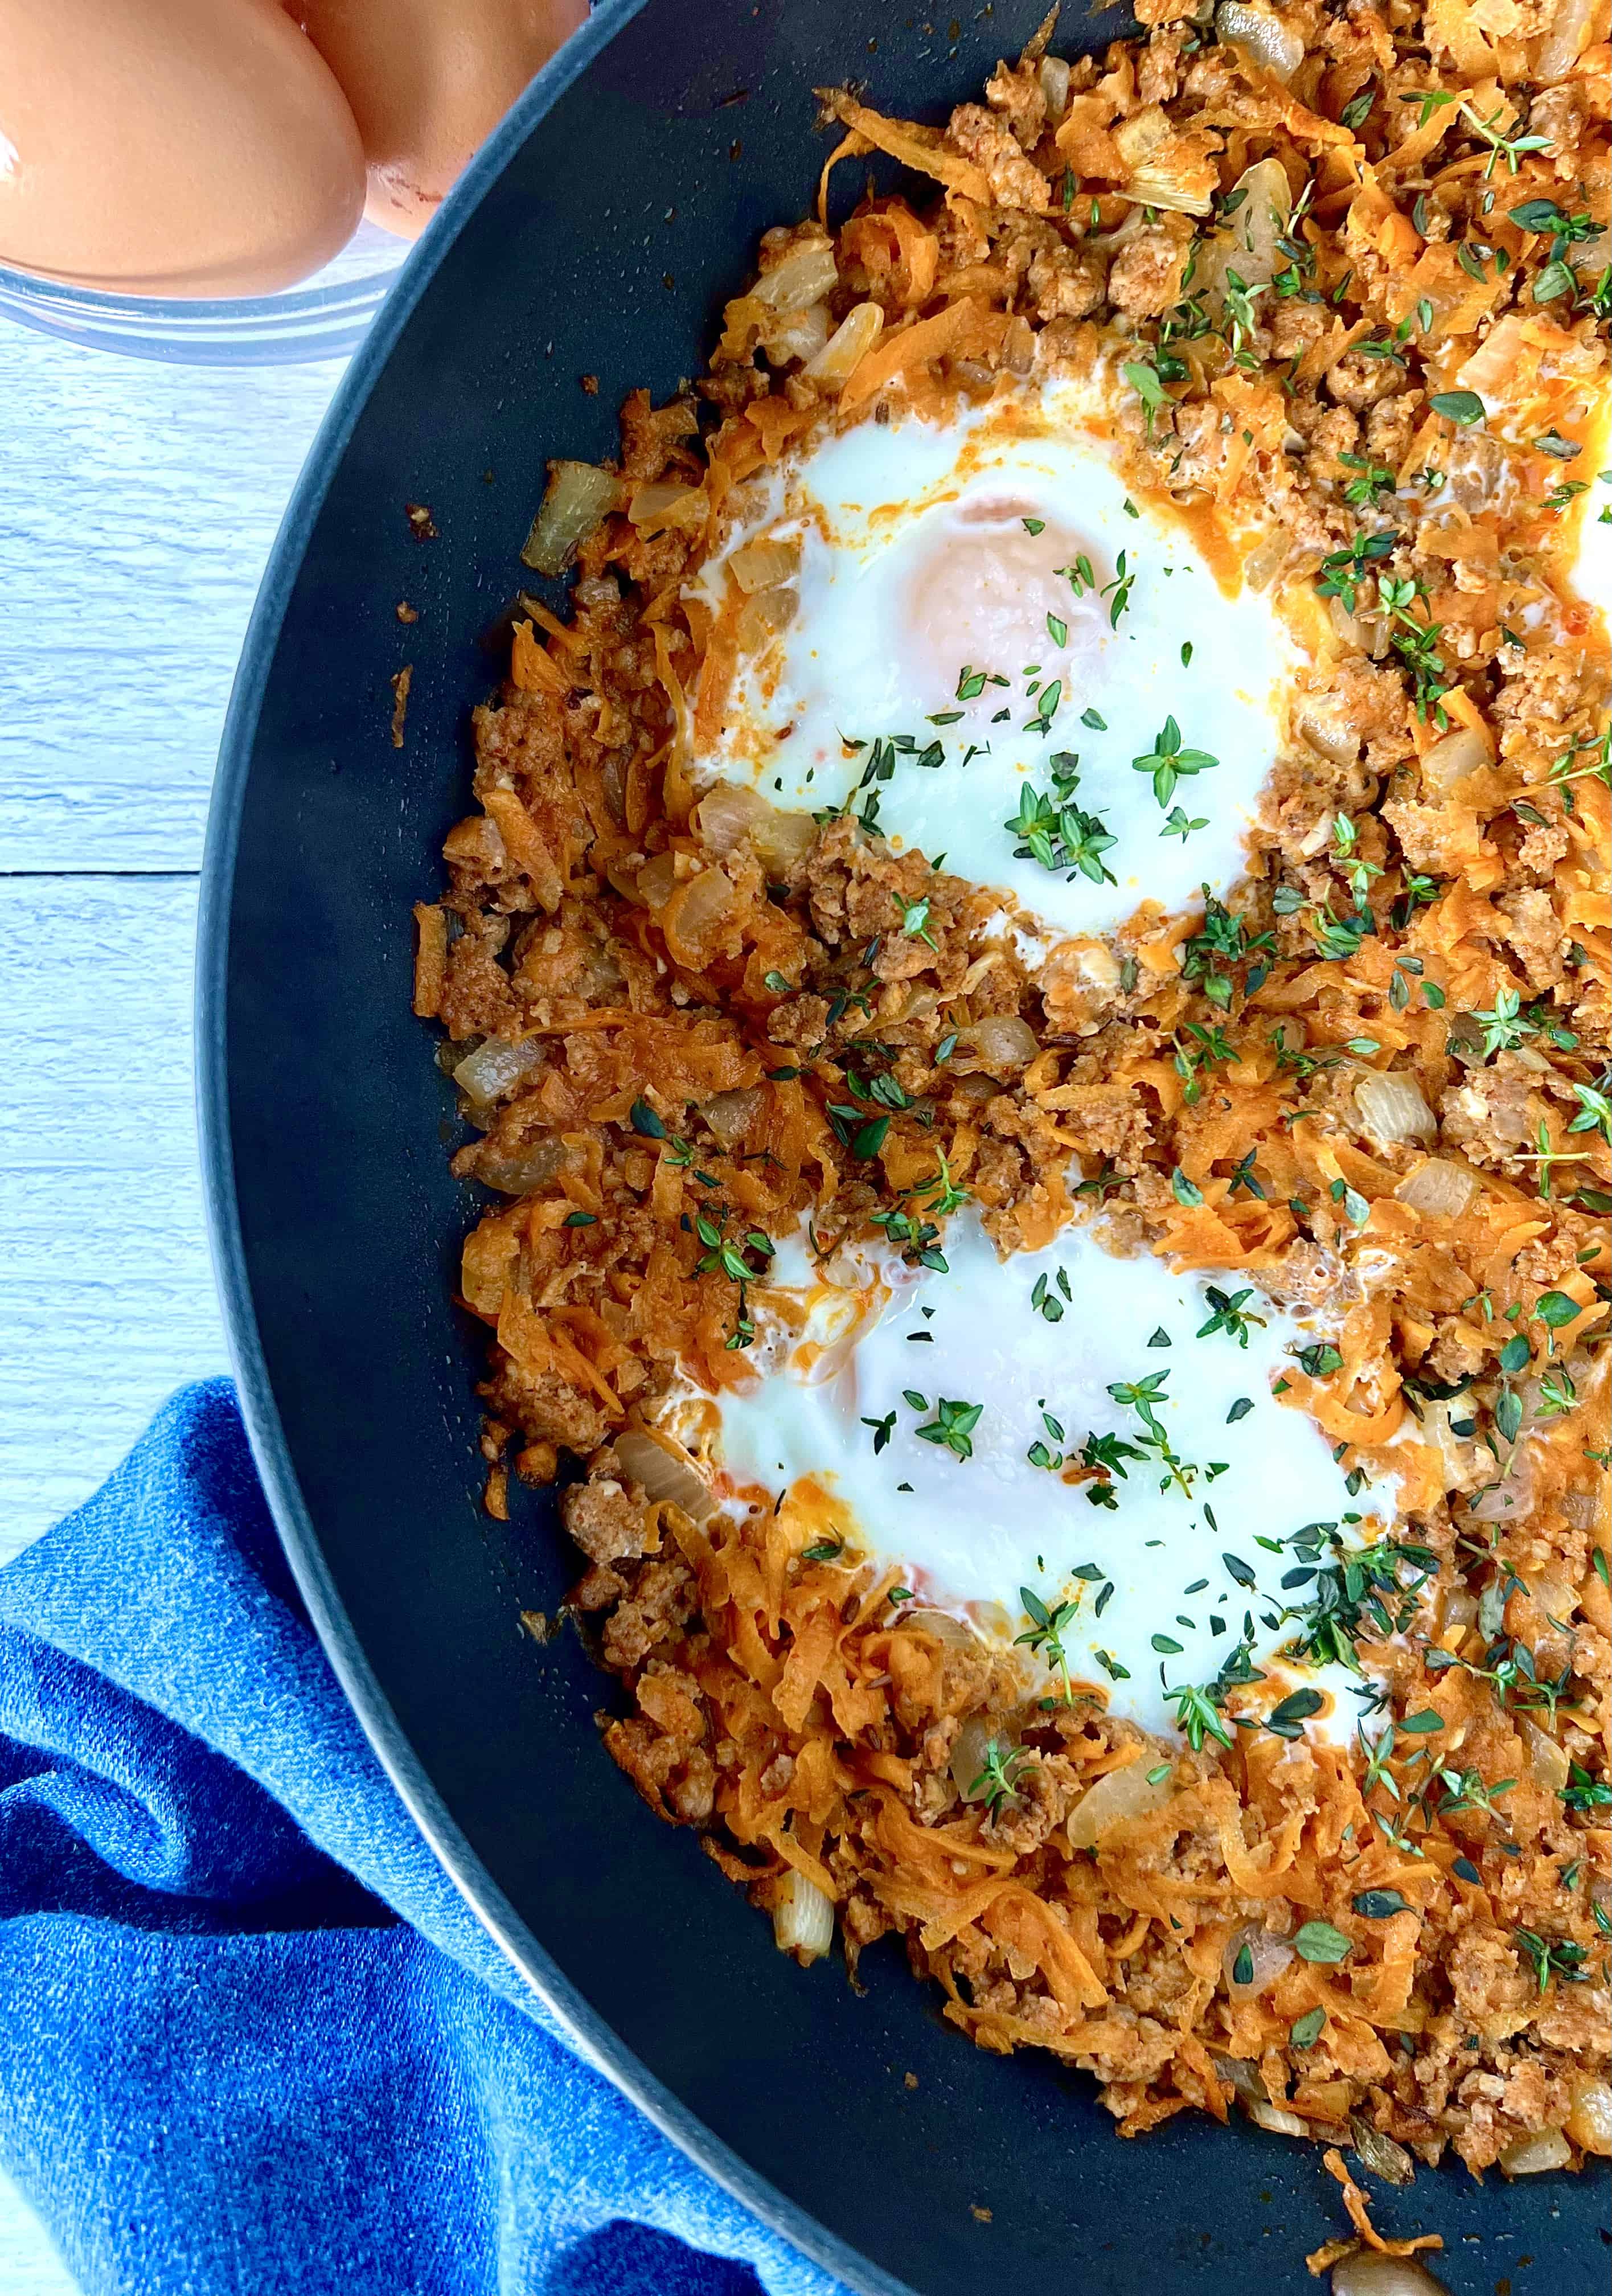 a health hash made with sweet potatoes, chorizo sausage and eggs in a large skillet next to a blue towel